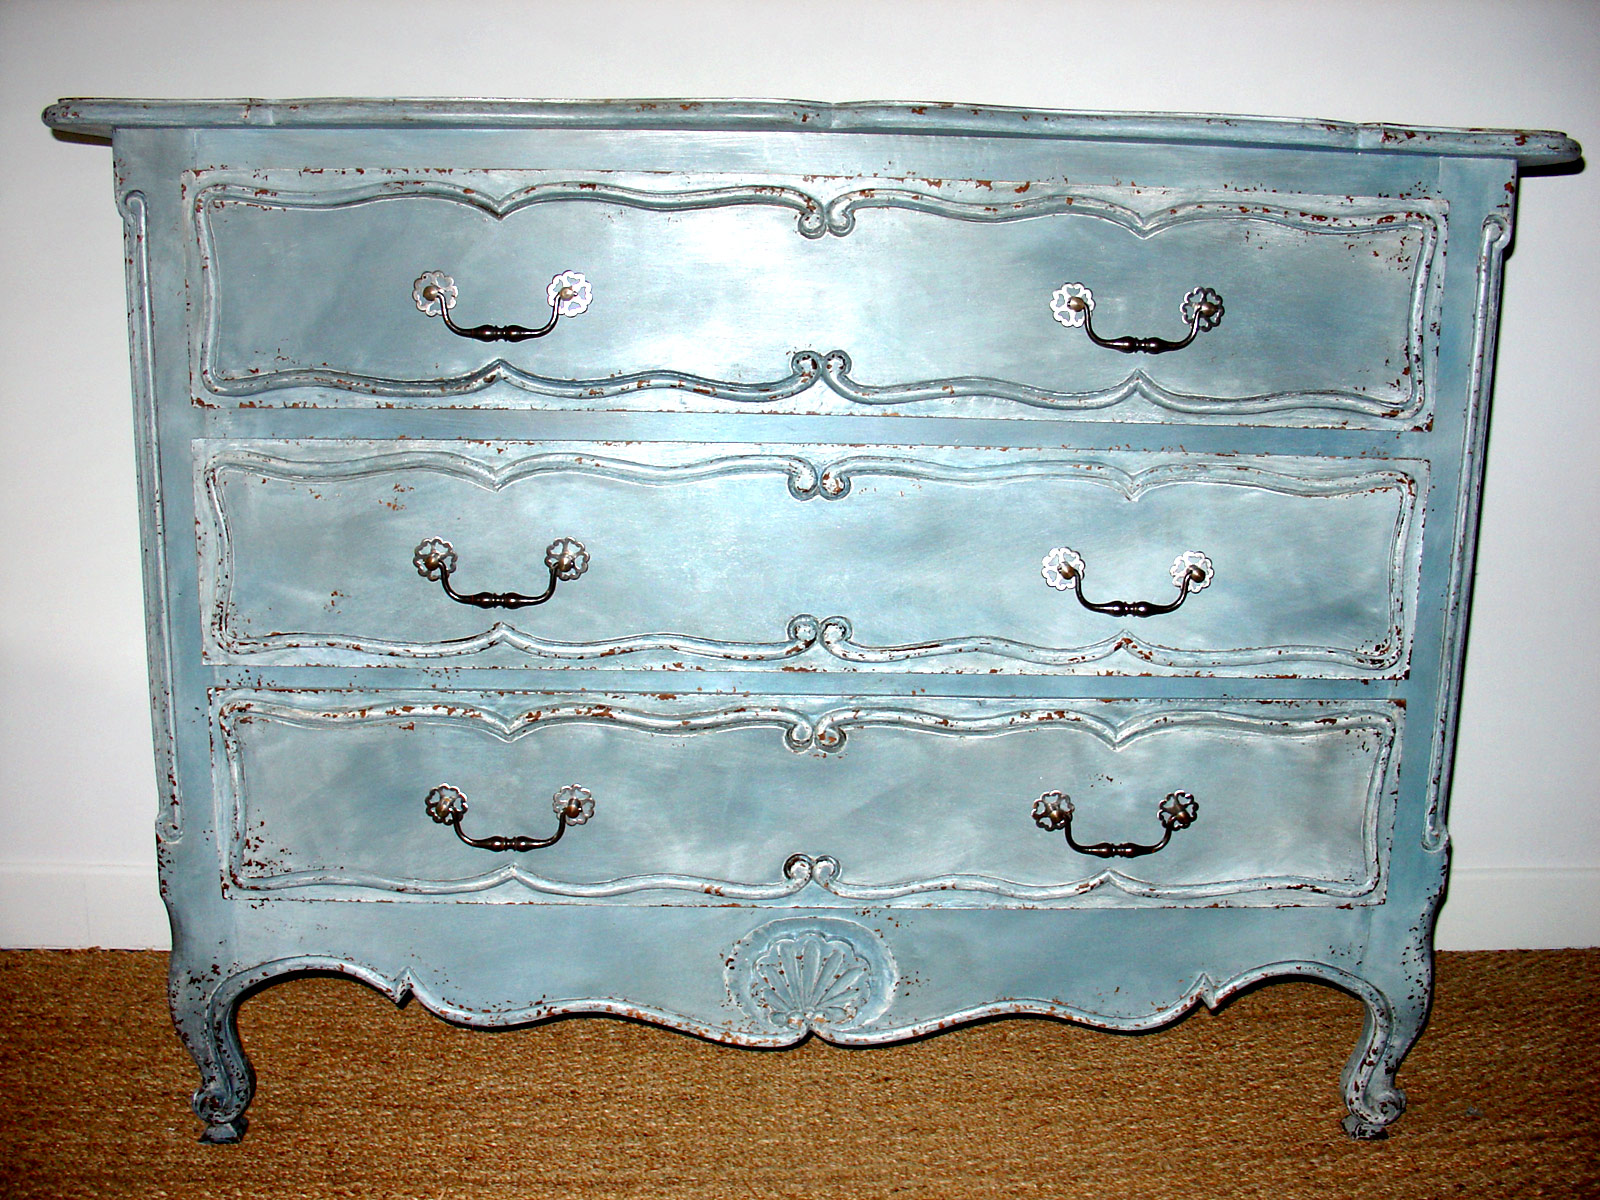 Painted Furniture Tracy Hecht